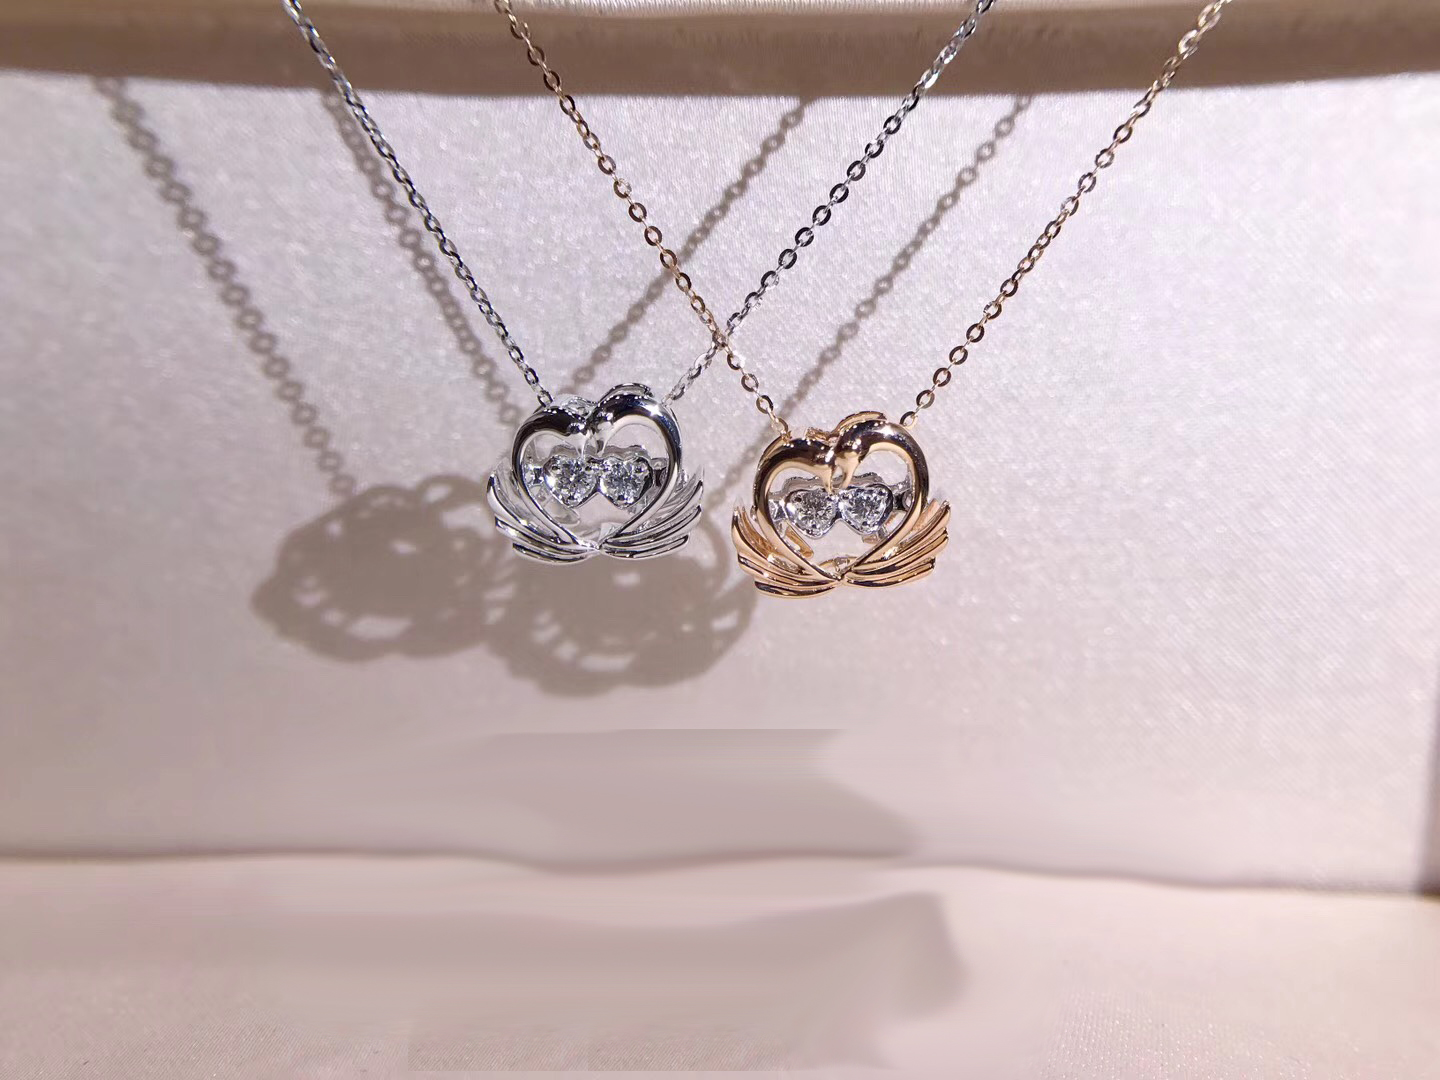 A00008 Diamond Necklace in White Gold/Rose Gold [A00008]